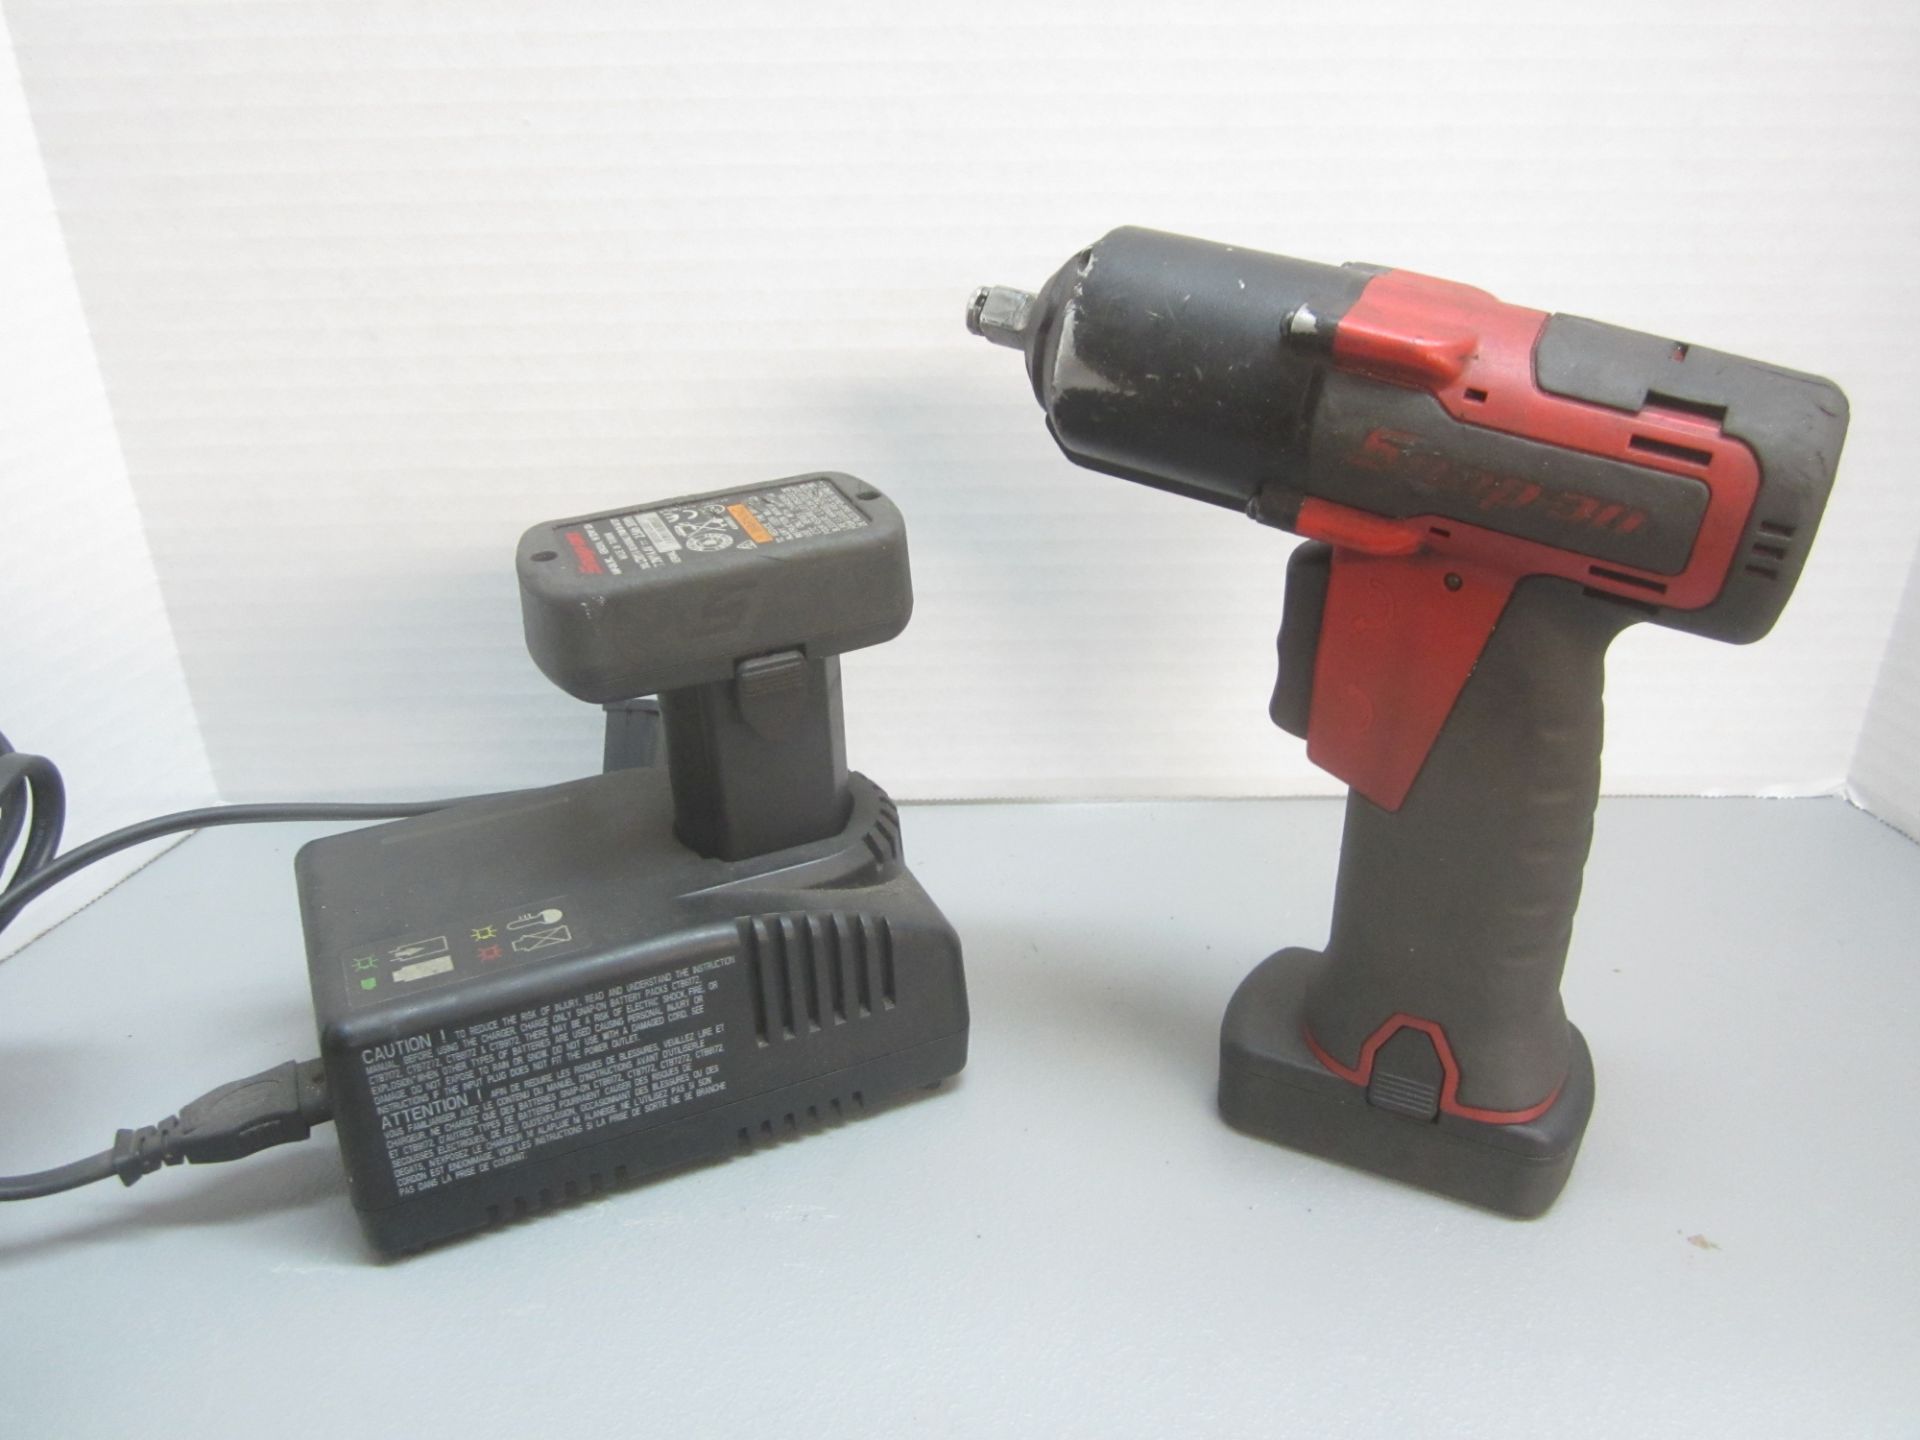 Snap On 14.4V Cordless Impact Driver, 3/8" Drive, Batteries, & Charger